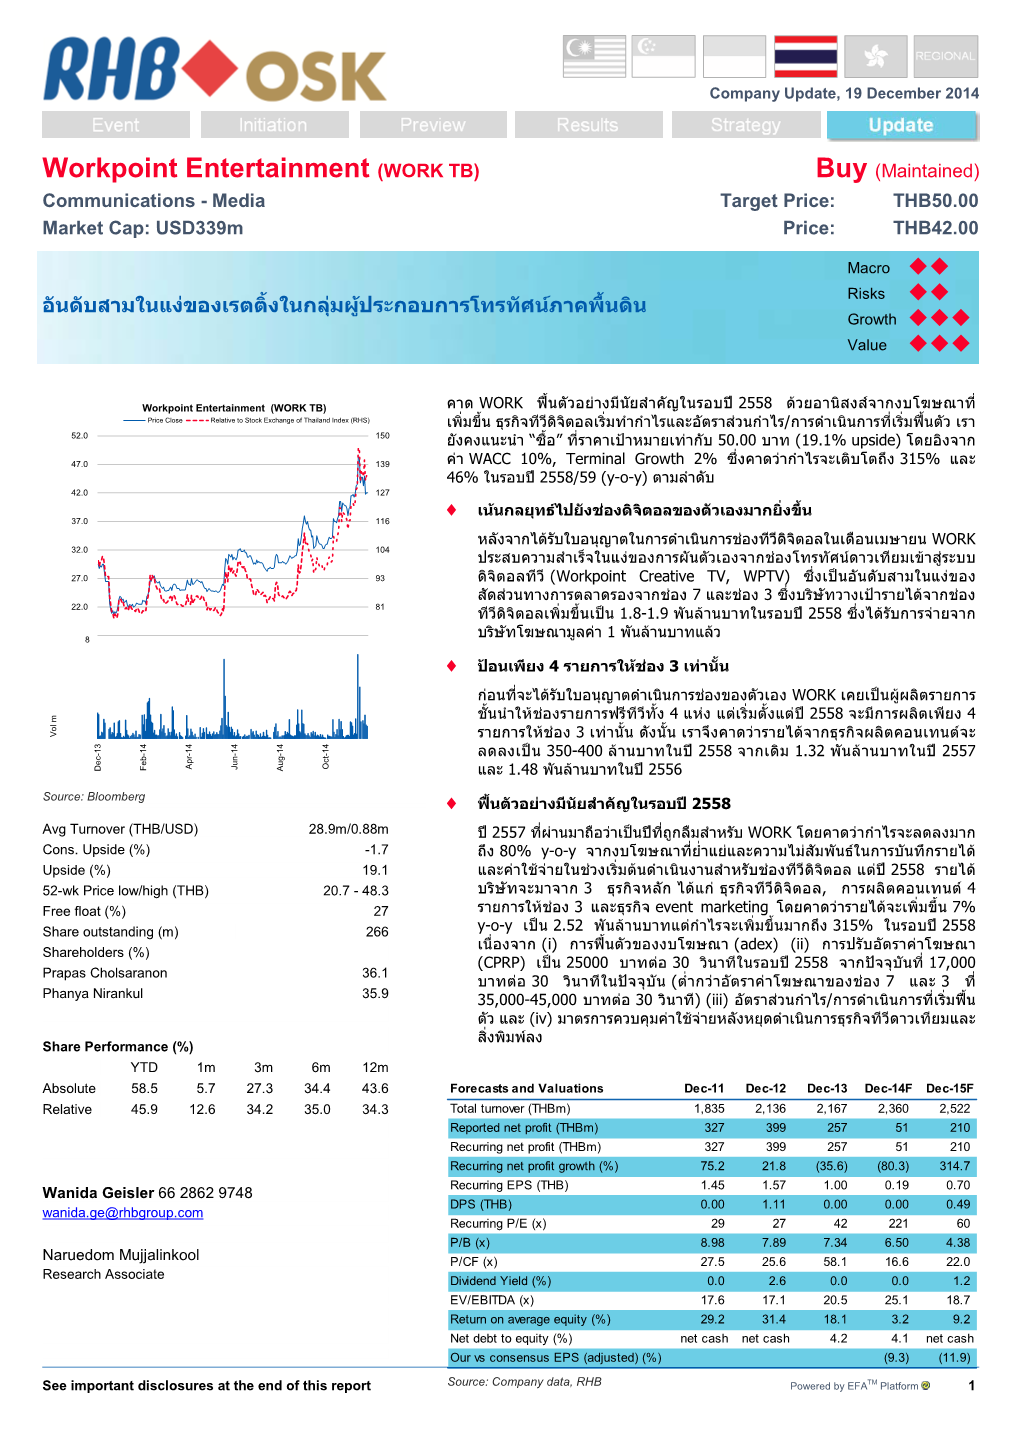 Workpoint Entertainment (WORK TB) Buy (Maintained) Communications - Media Target Price: THB50.00 Market Cap: Usd339m Price: THB42.00